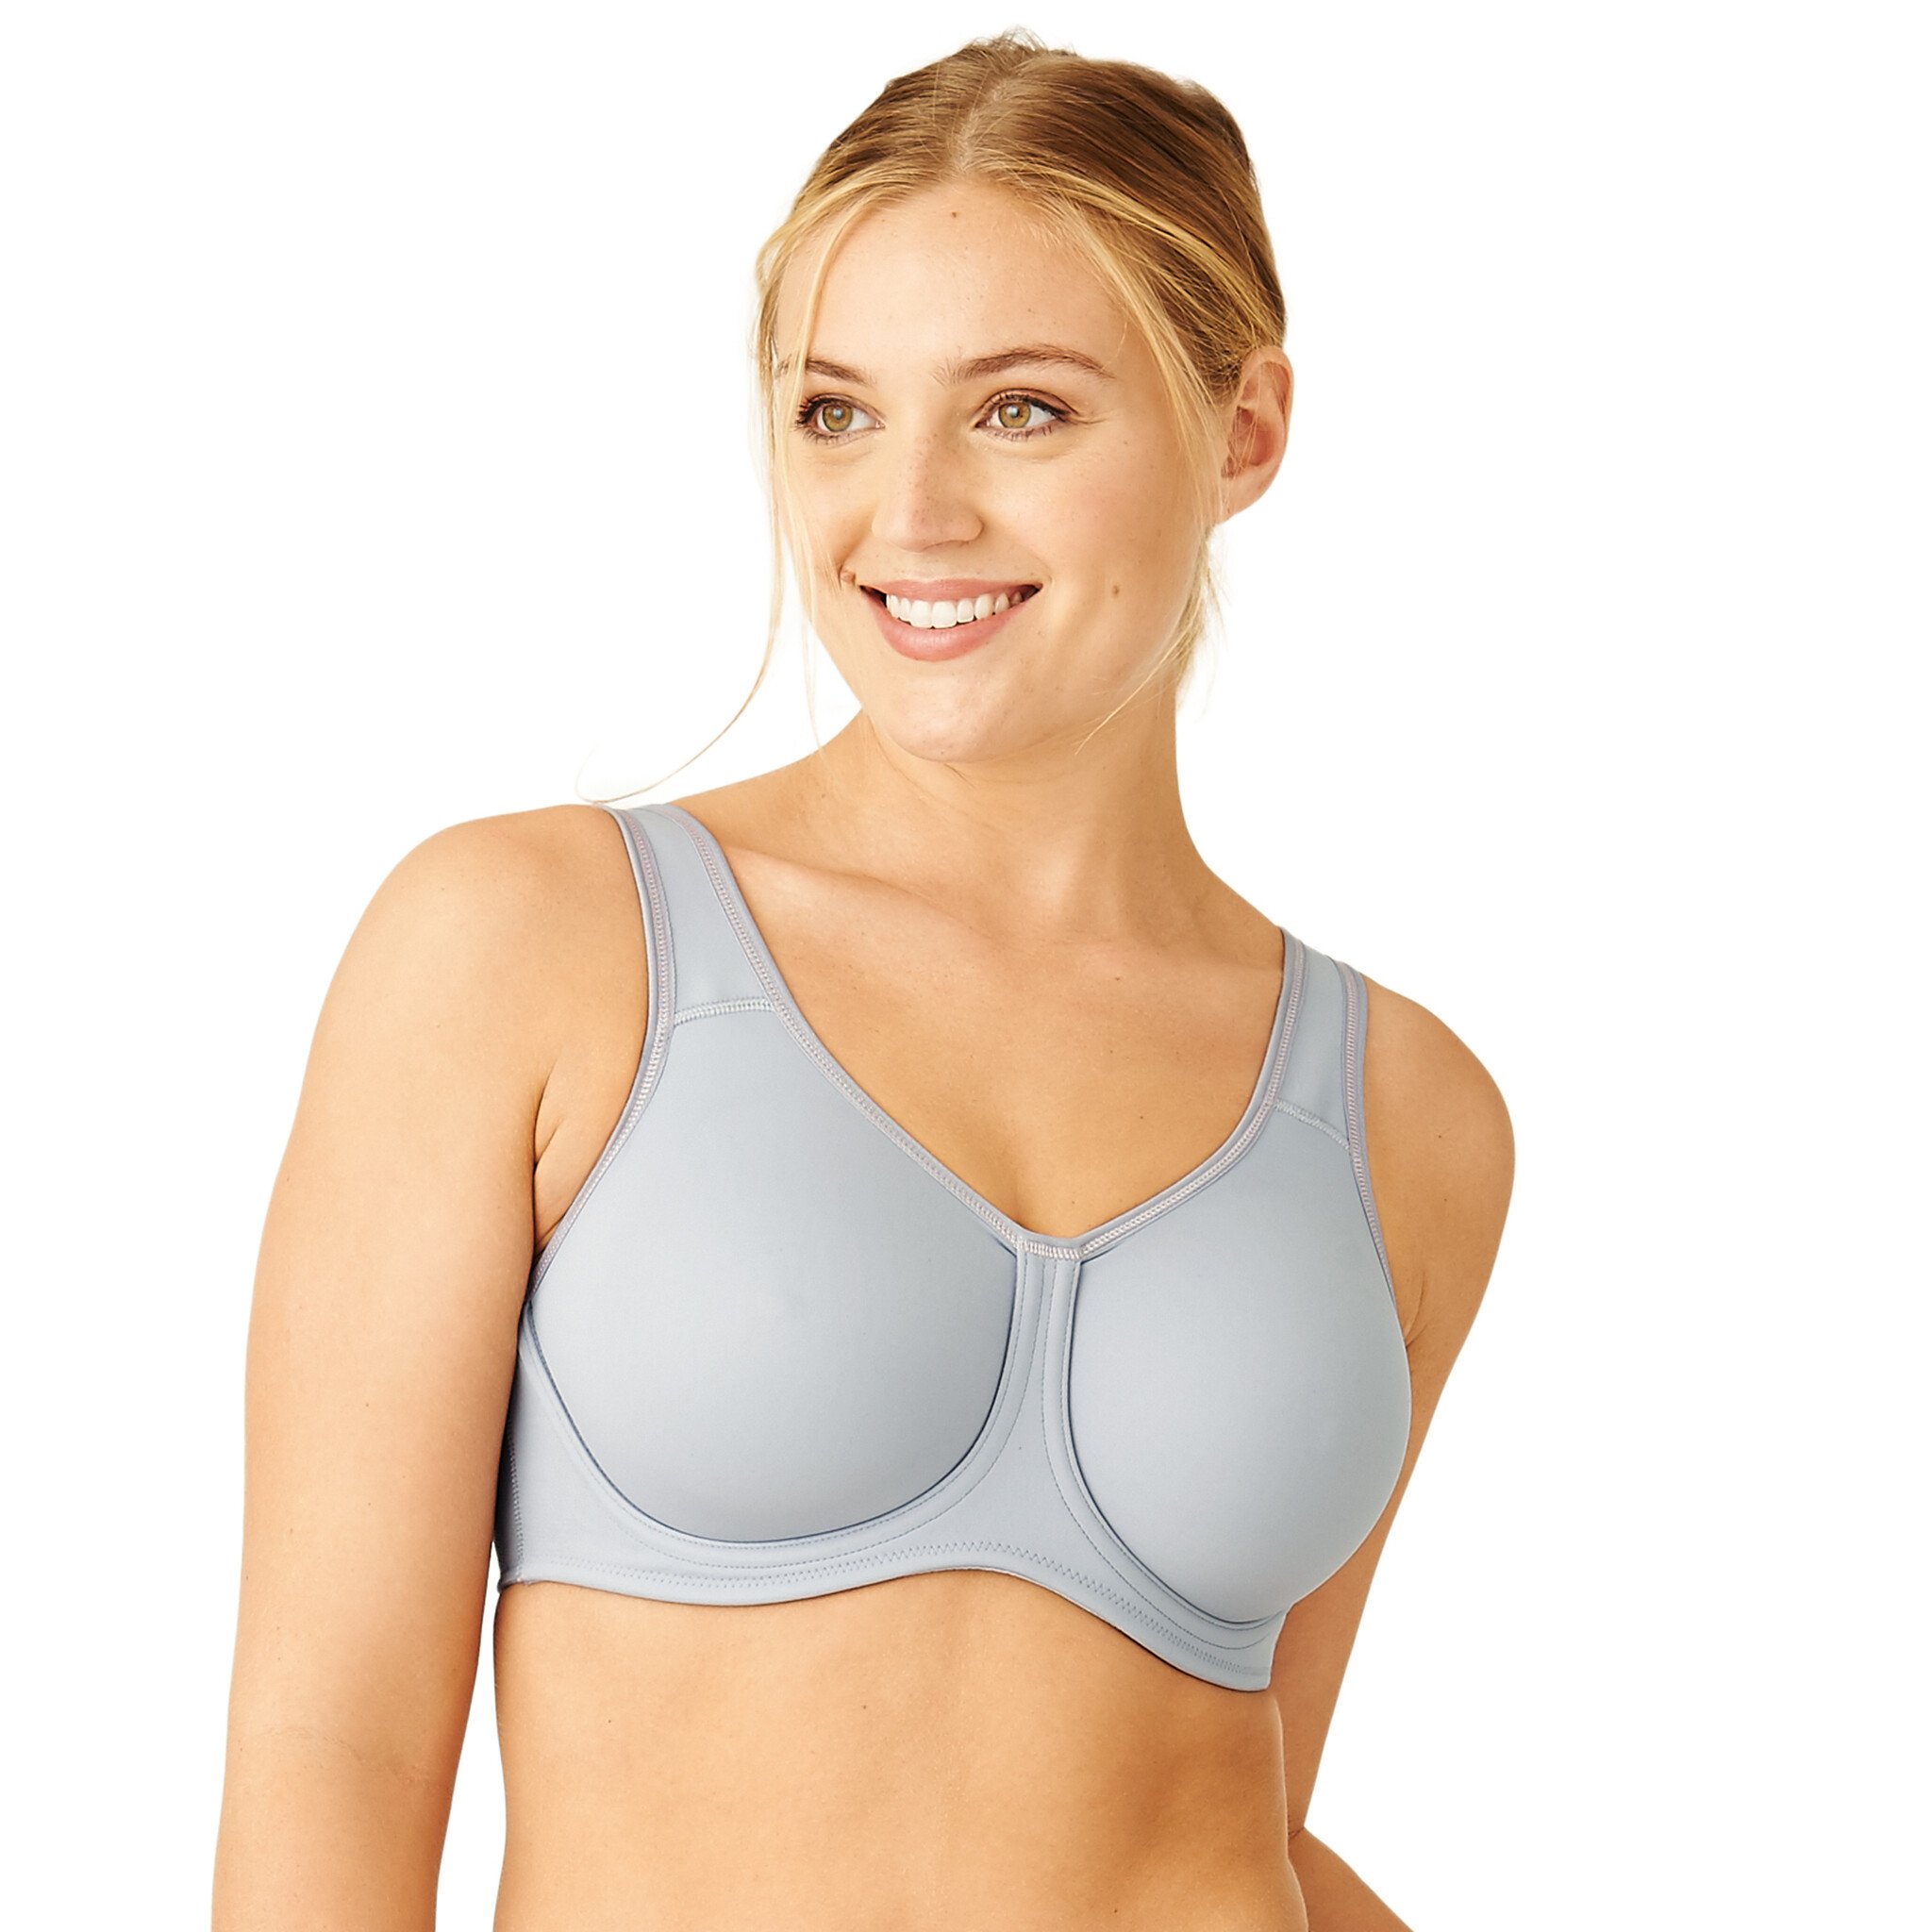 Buy Wacoal Women's Simone Sport, Non-Padded, Wired, Full Cup, High Intensity, Full Coverage